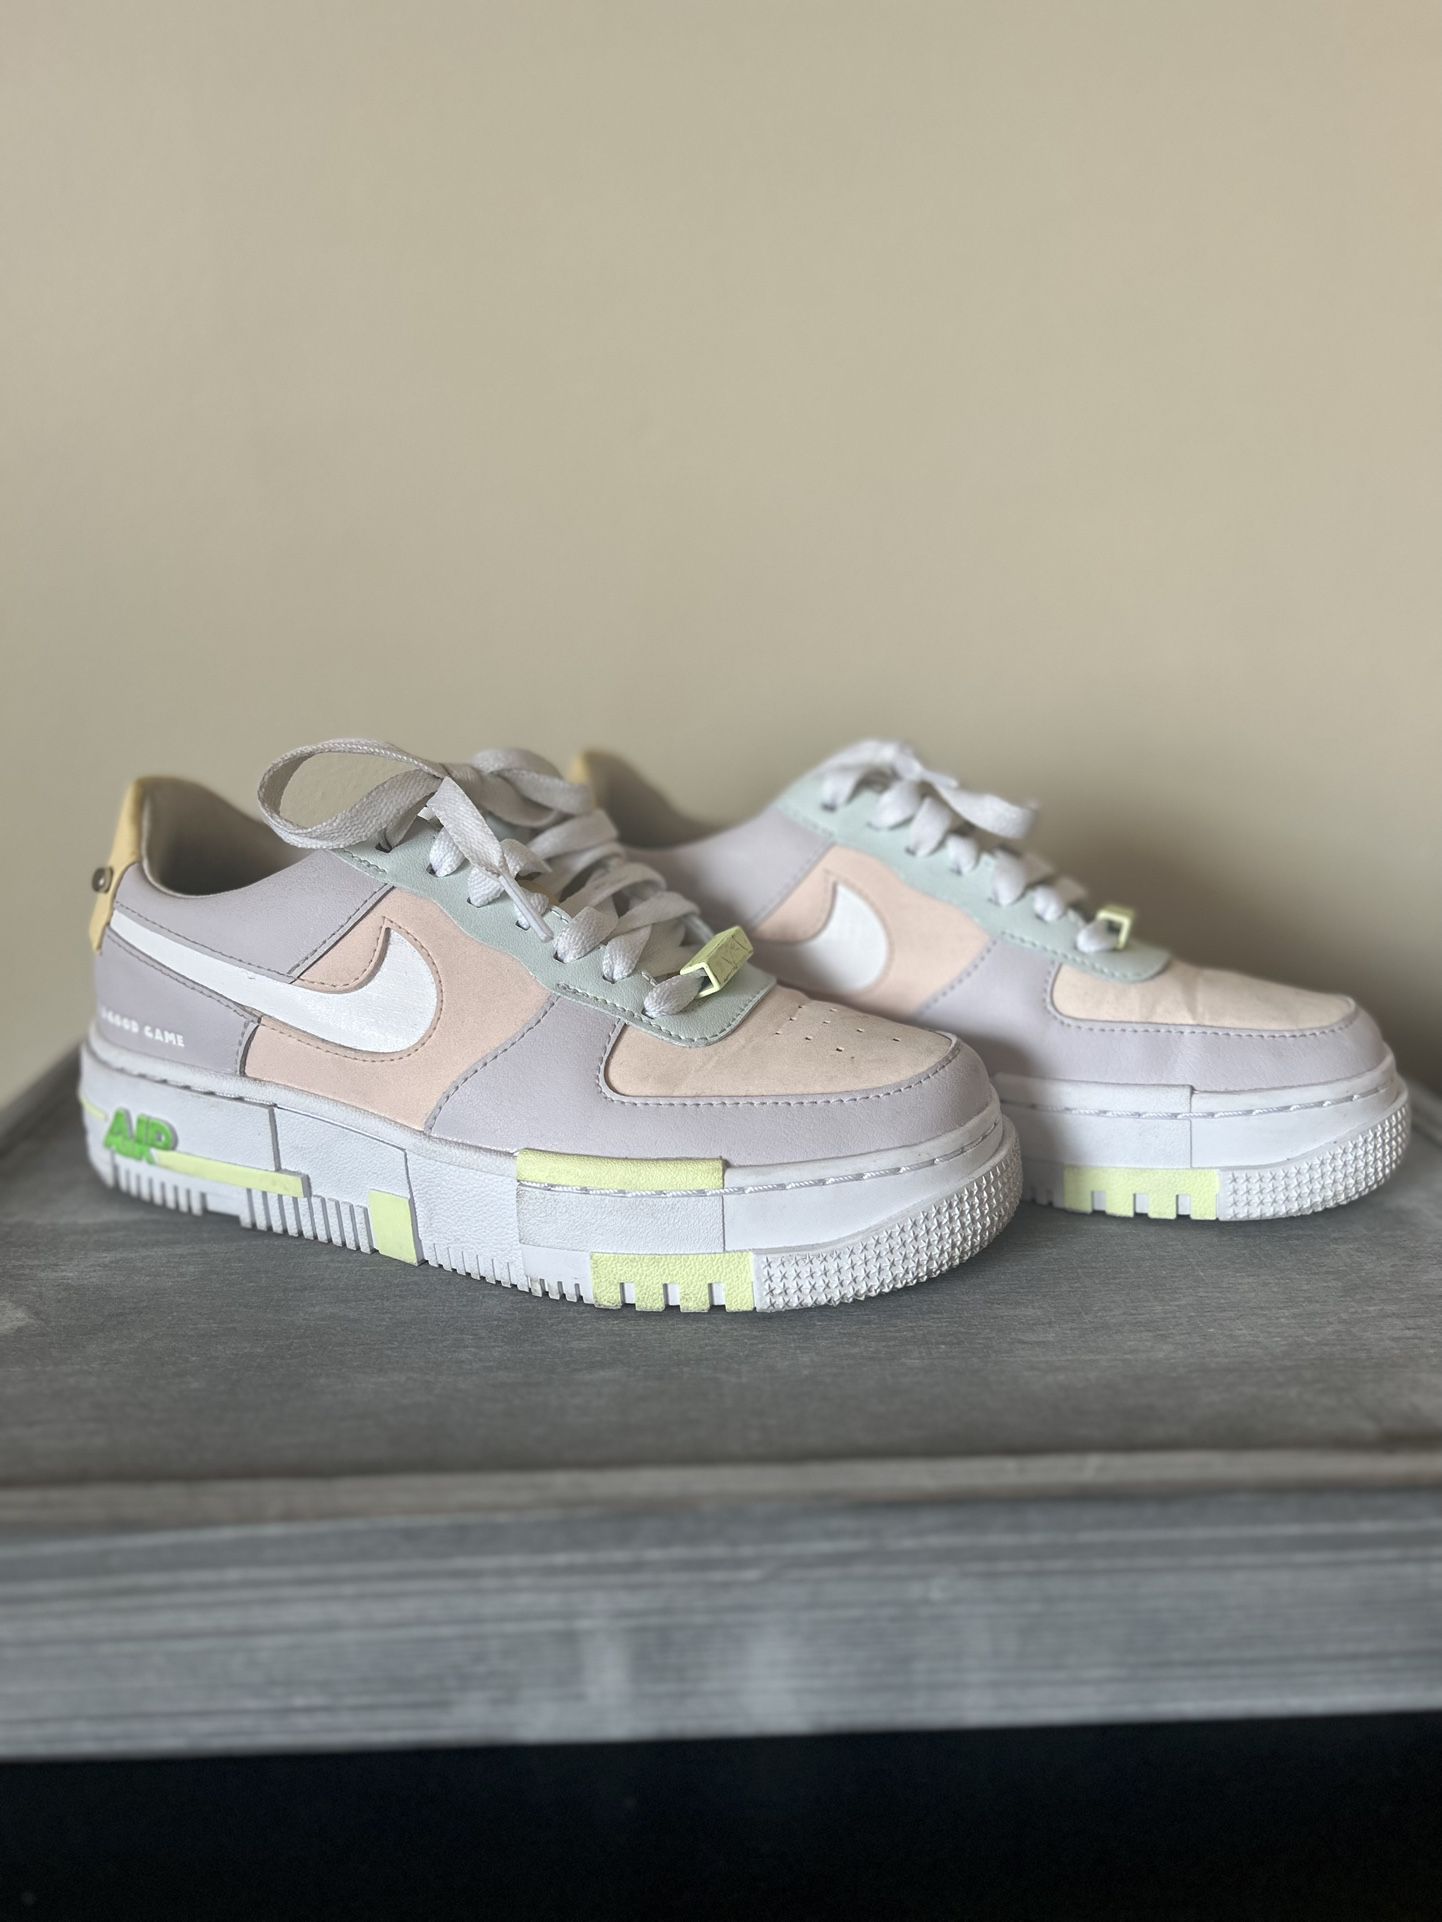 LPL x Nike Air Force 1 Pixel Have A Good Game Info